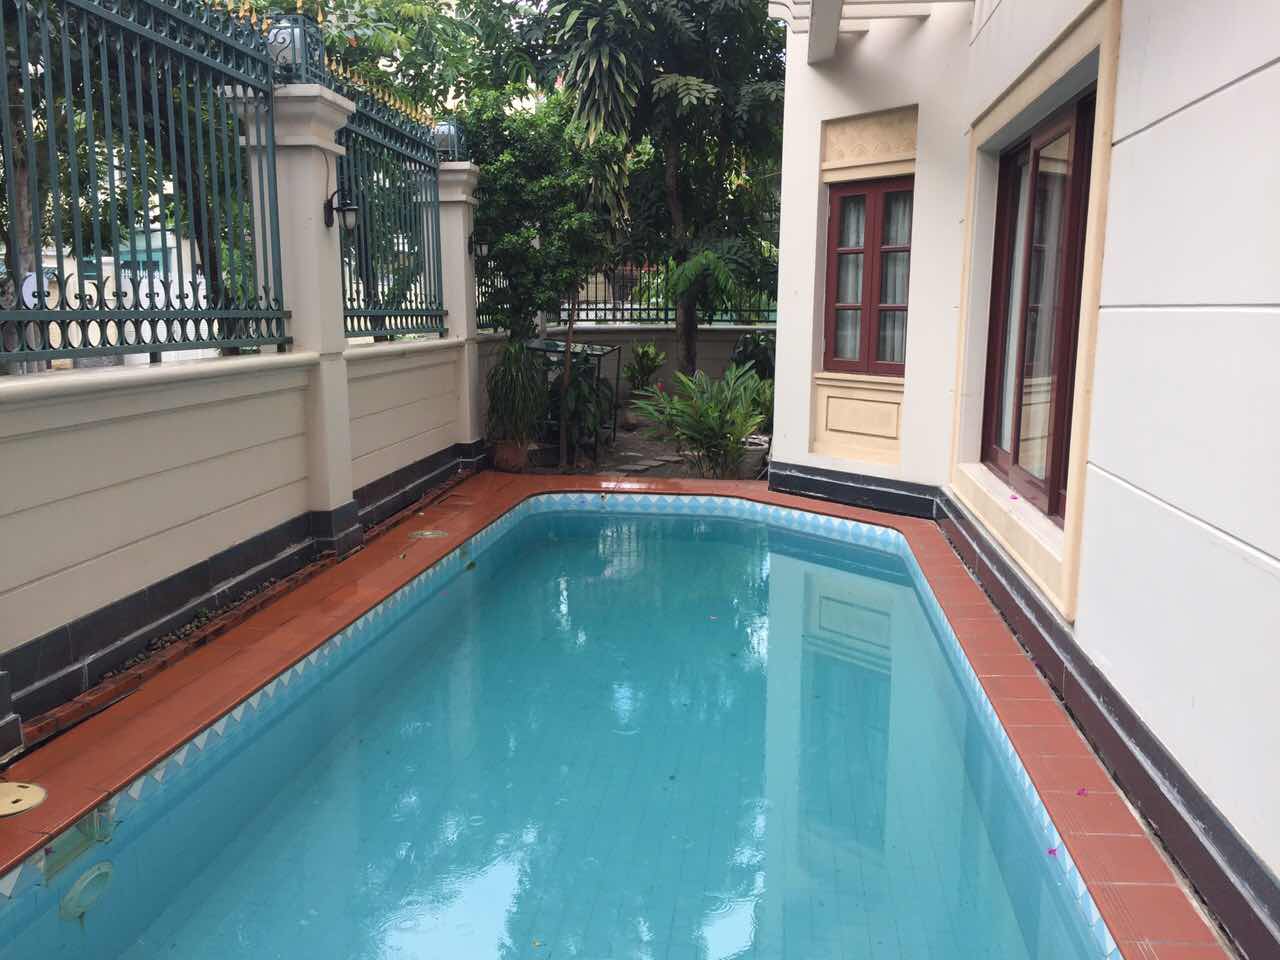 VILLA IN COMPOUND, 4 BEDROOMS FOR RENT IN THAO DIEN WARD, HCMC